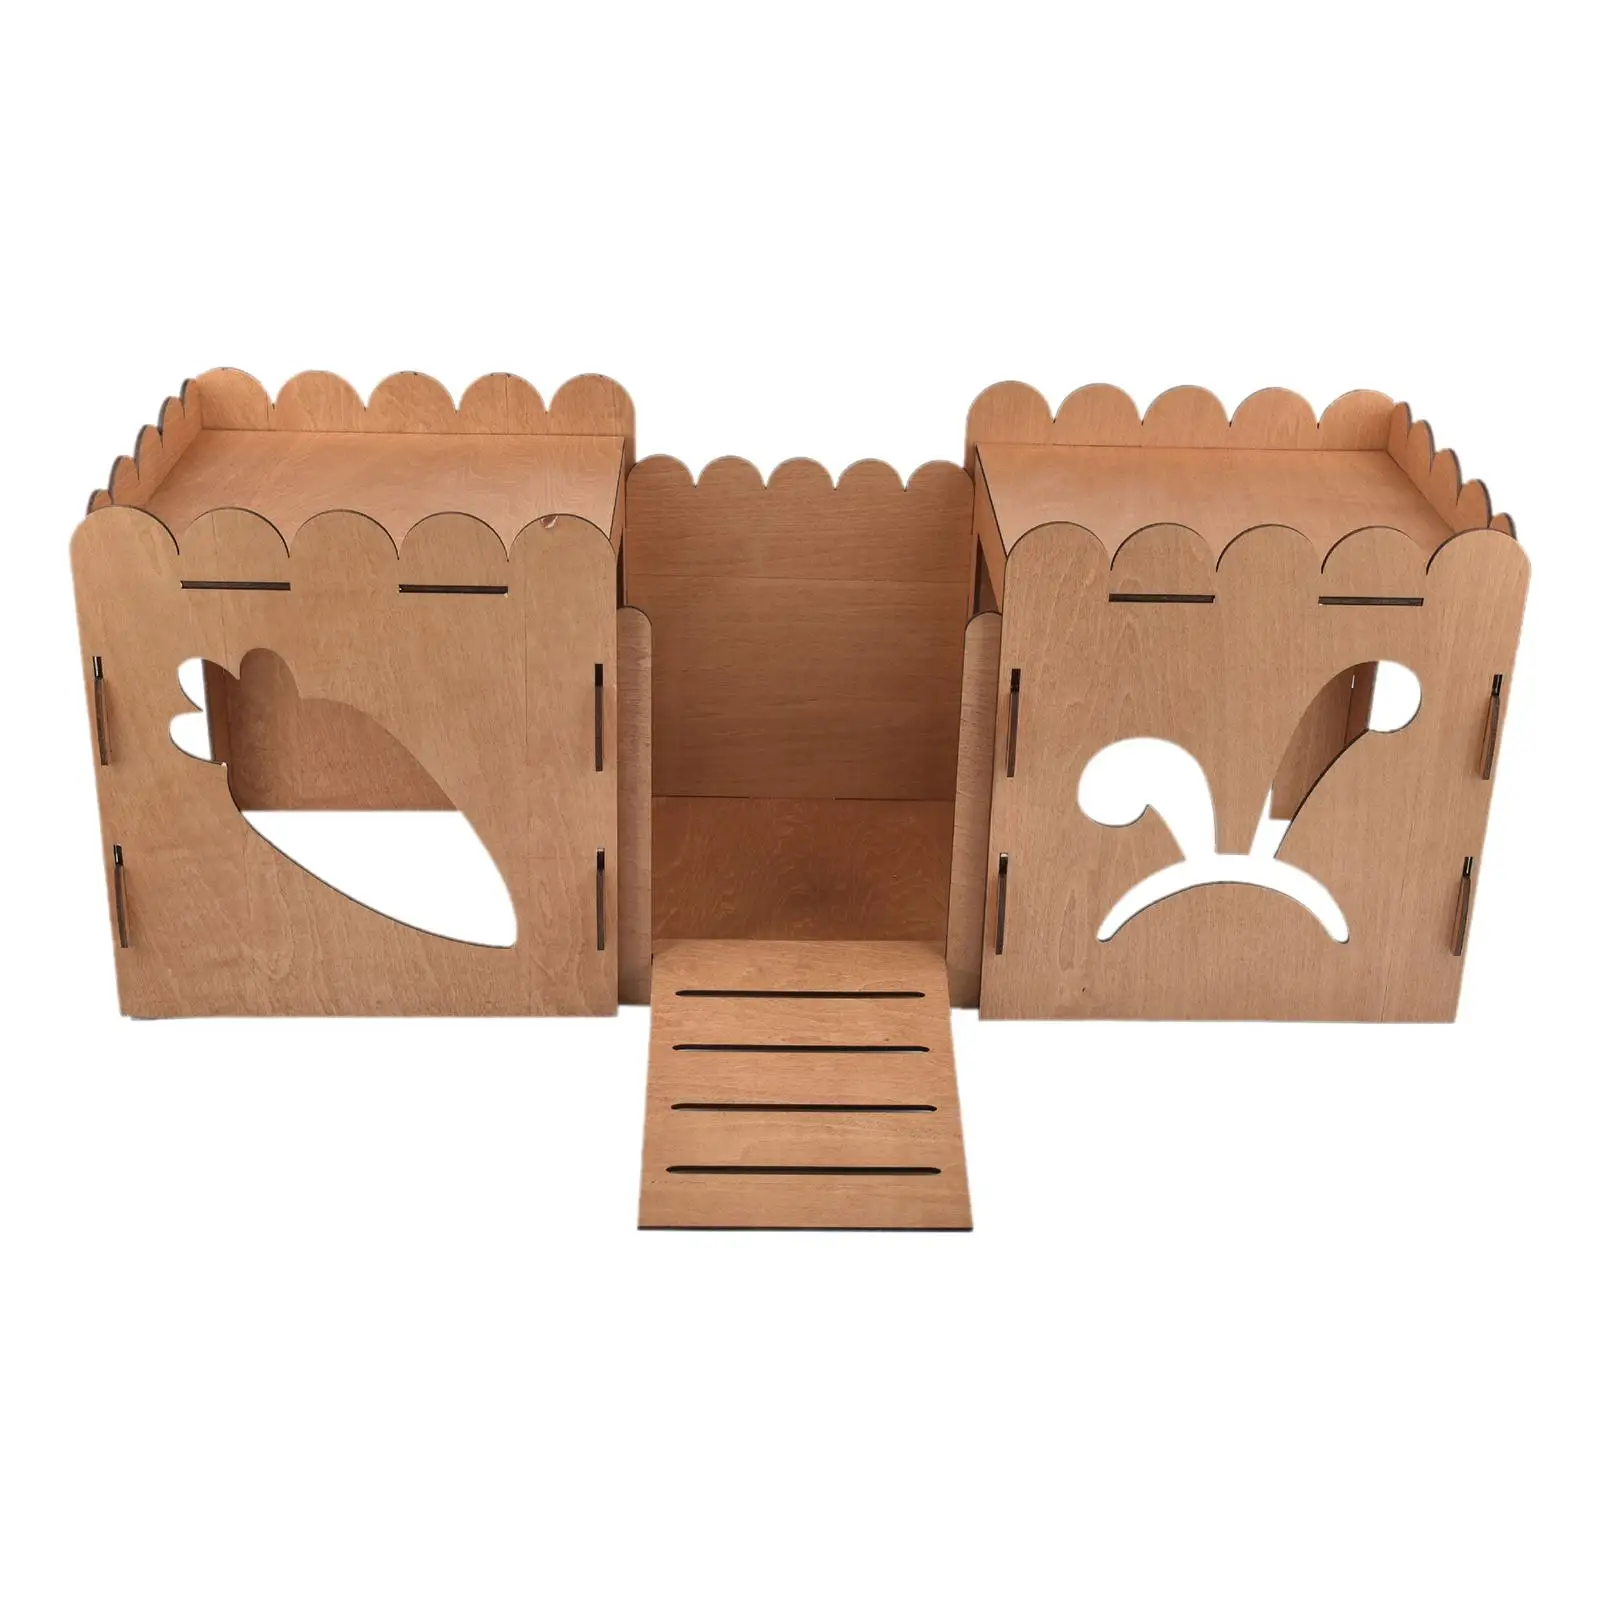 Hamster House Small Animal House Bed with Stairs Wooden Rabbit Castle Hideout House for Guinea Pig Squirrel Rat Lemmings Resting